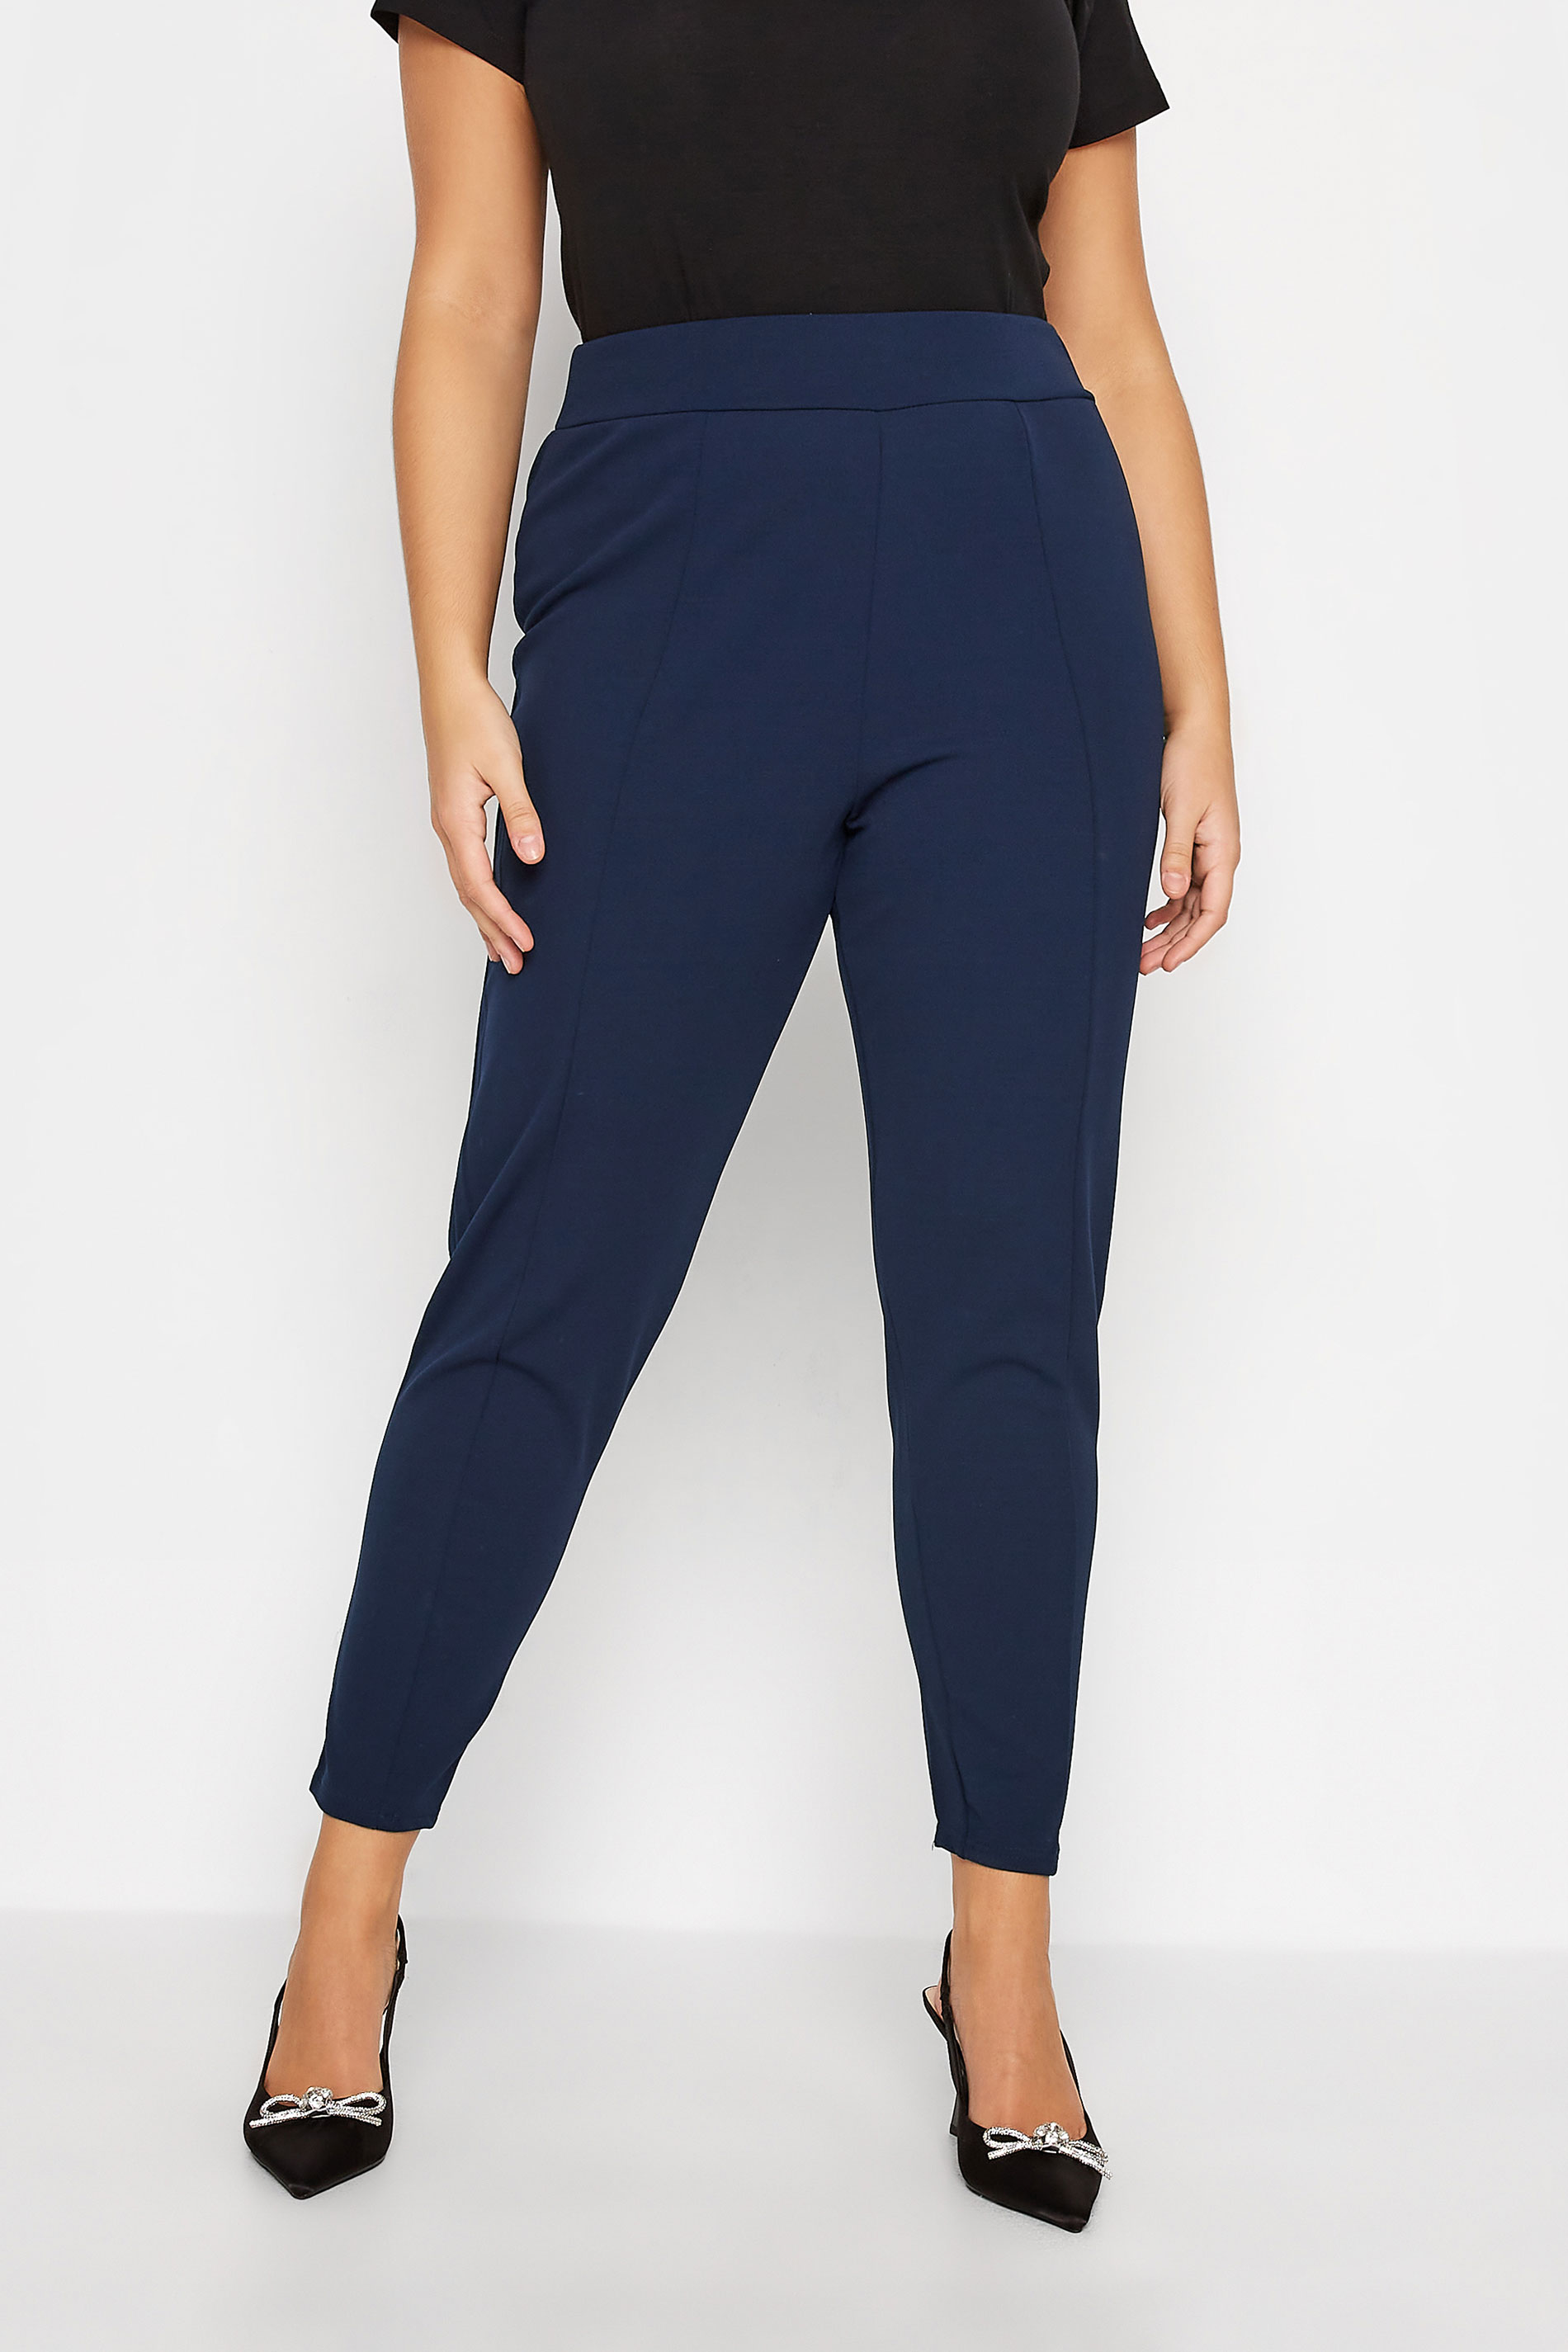 Plus Size Navy Blue Tapered Trousers - Petite | Yours Clothing 1